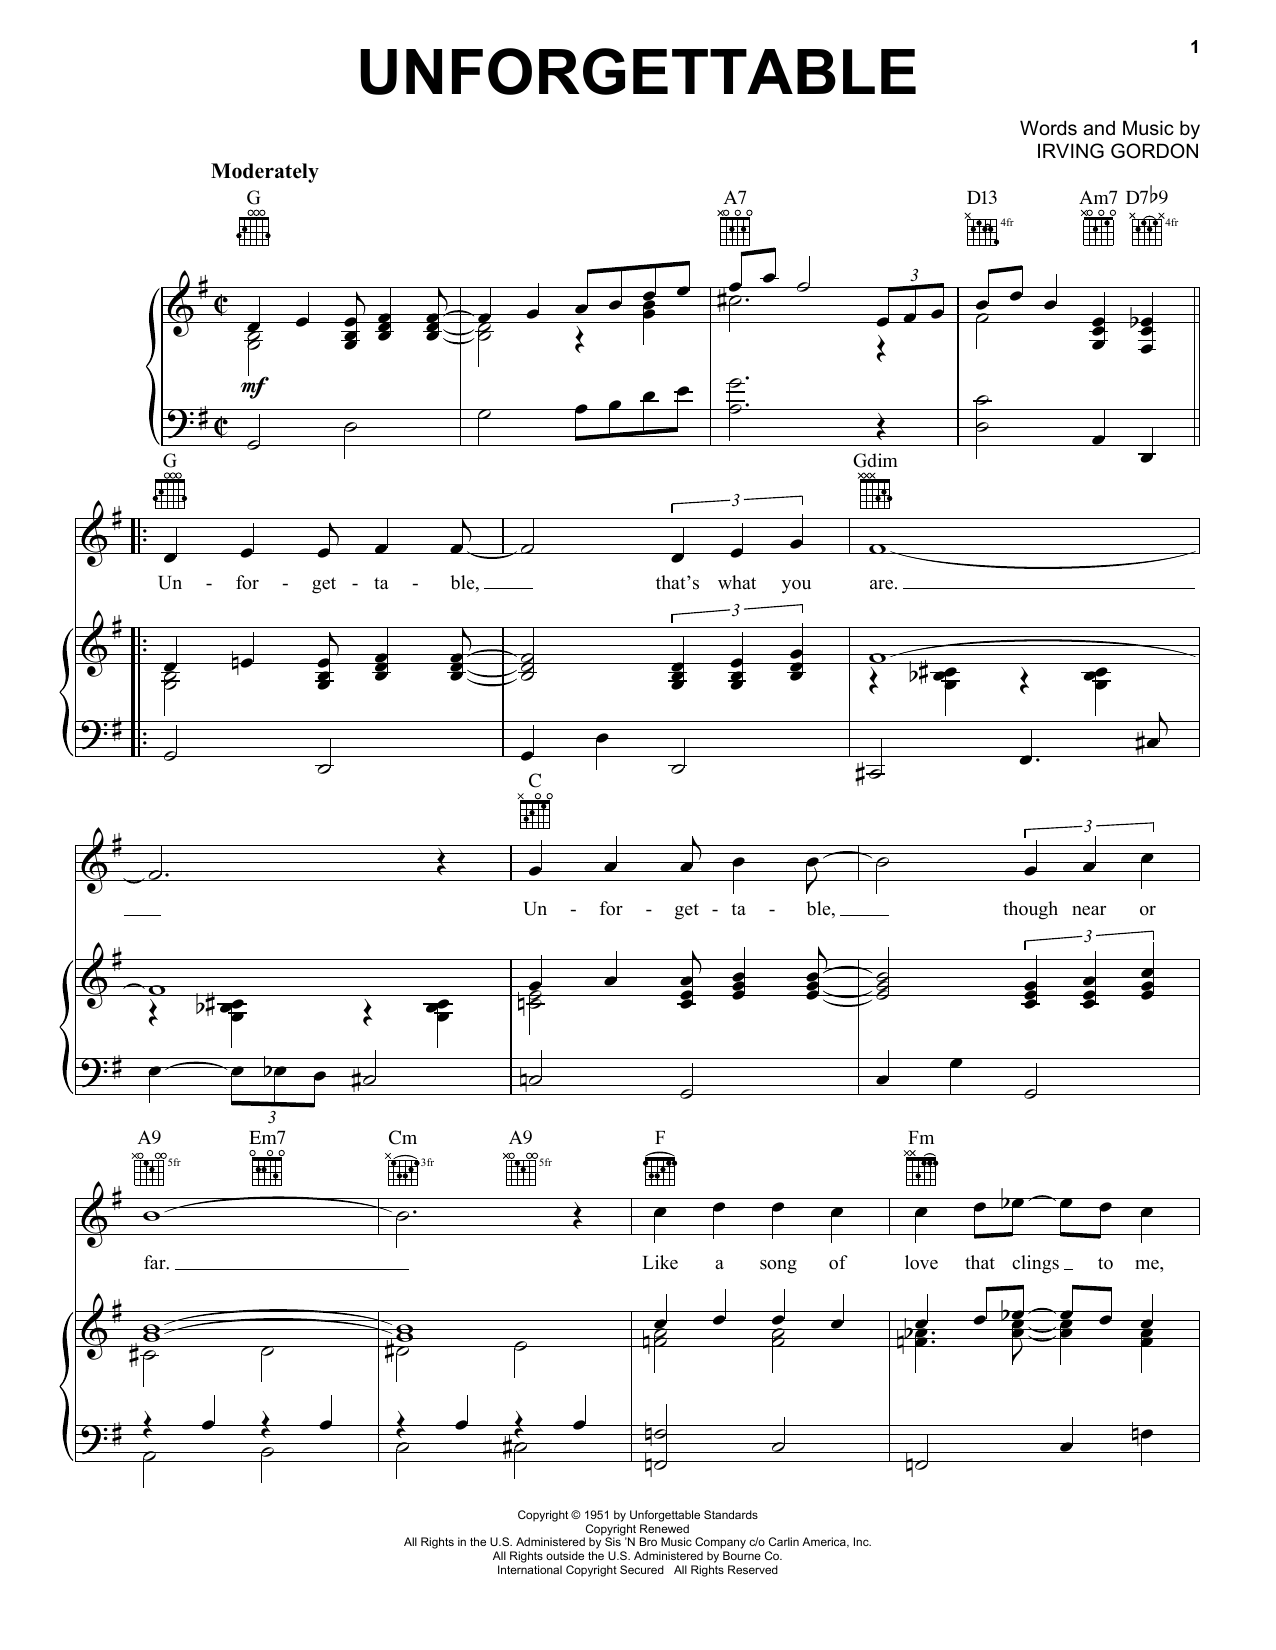 Nat King Cole Unforgettable sheet music notes and chords. Download Printable PDF.